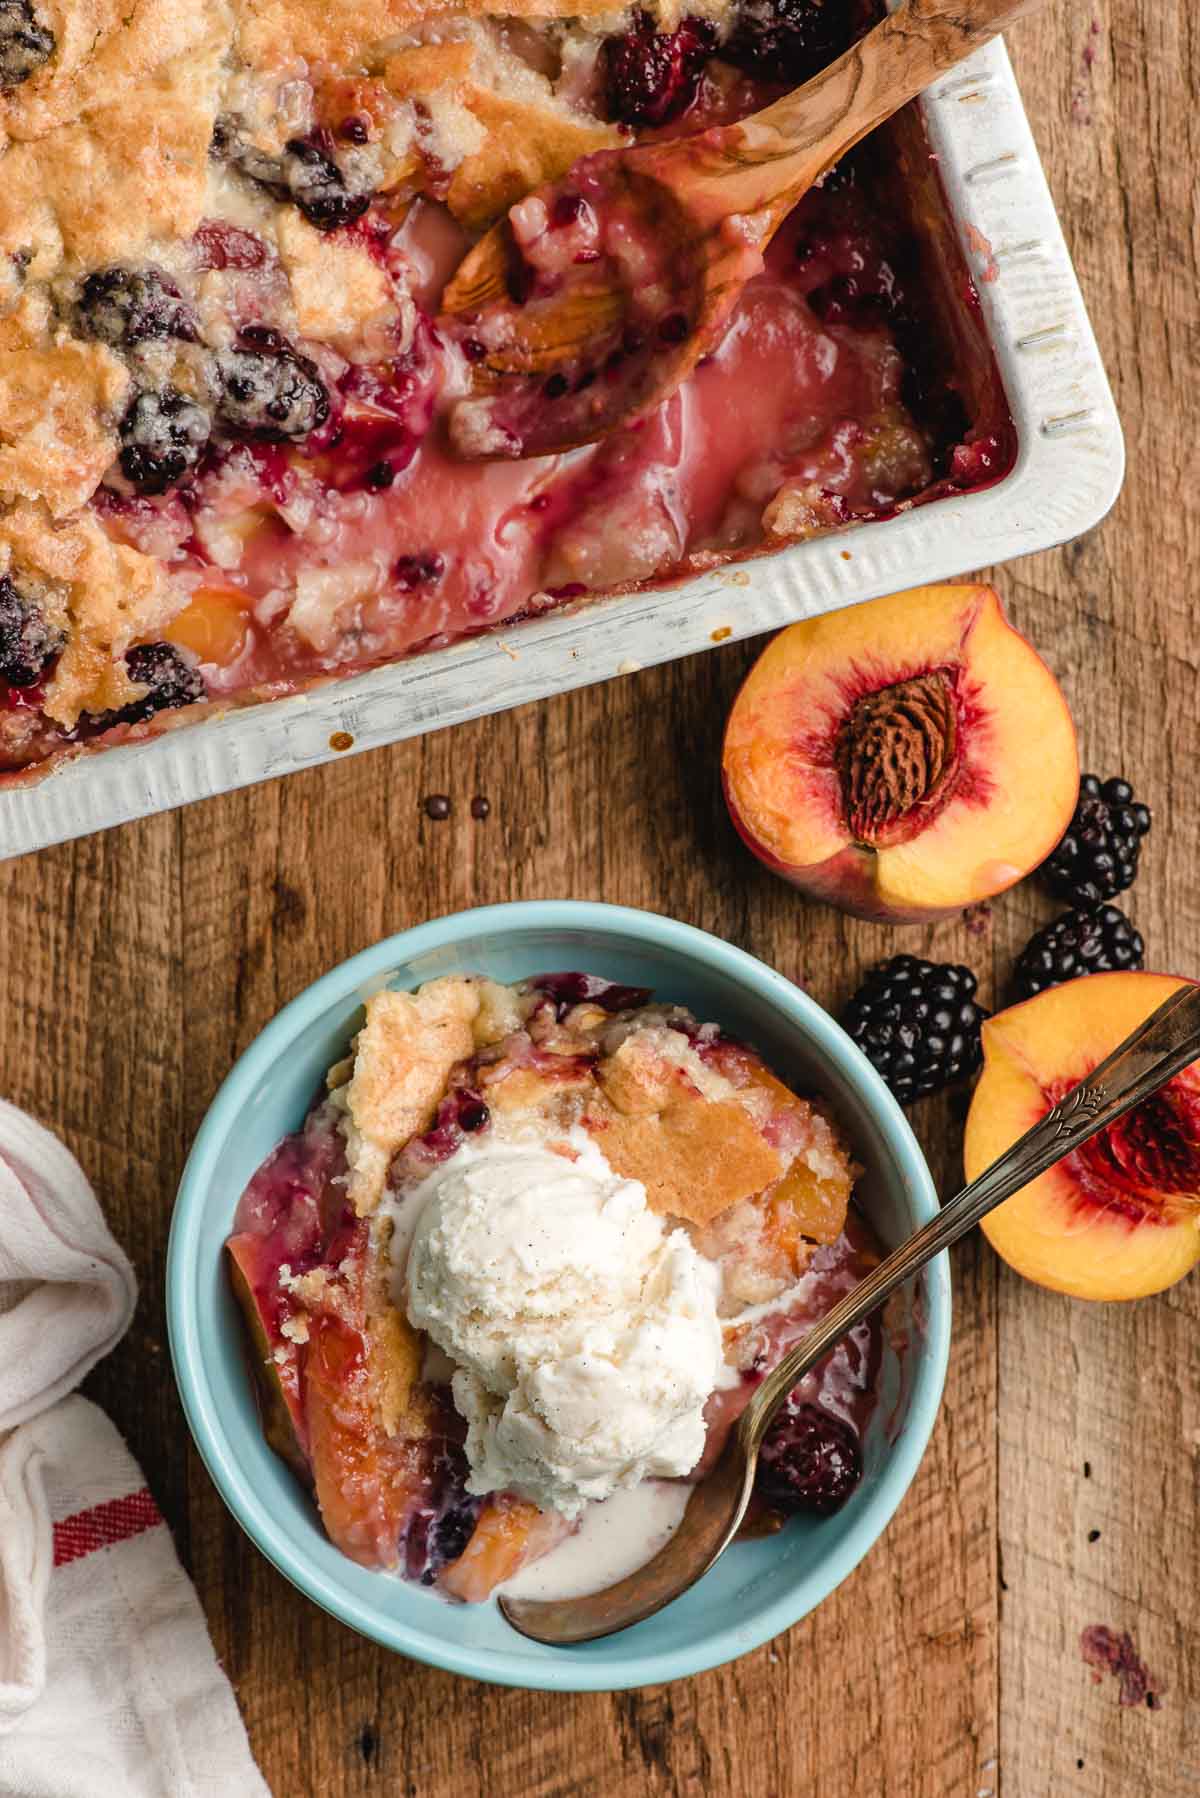 Pan of blackberry peach cobbler with a wooden serving spoon, alongside a bowl with a scoop of cobbler and ice cream.